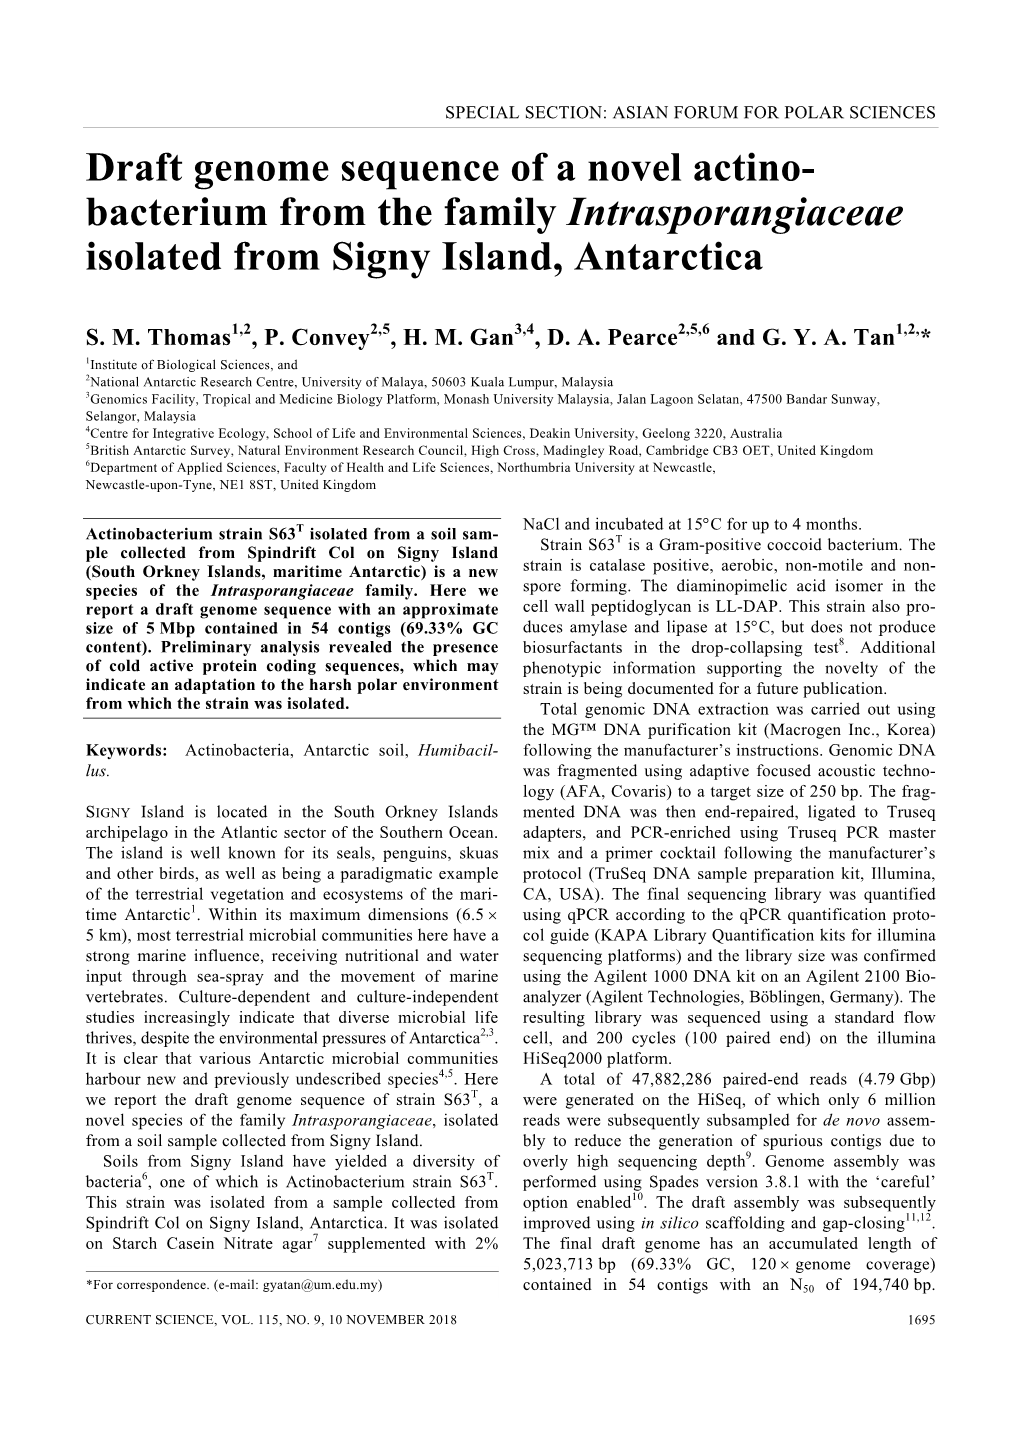 Draft Genome Sequence of a Novel Actino- Bacterium from the Family Intrasporangiaceae Isolated from Signy Island, Antarctica